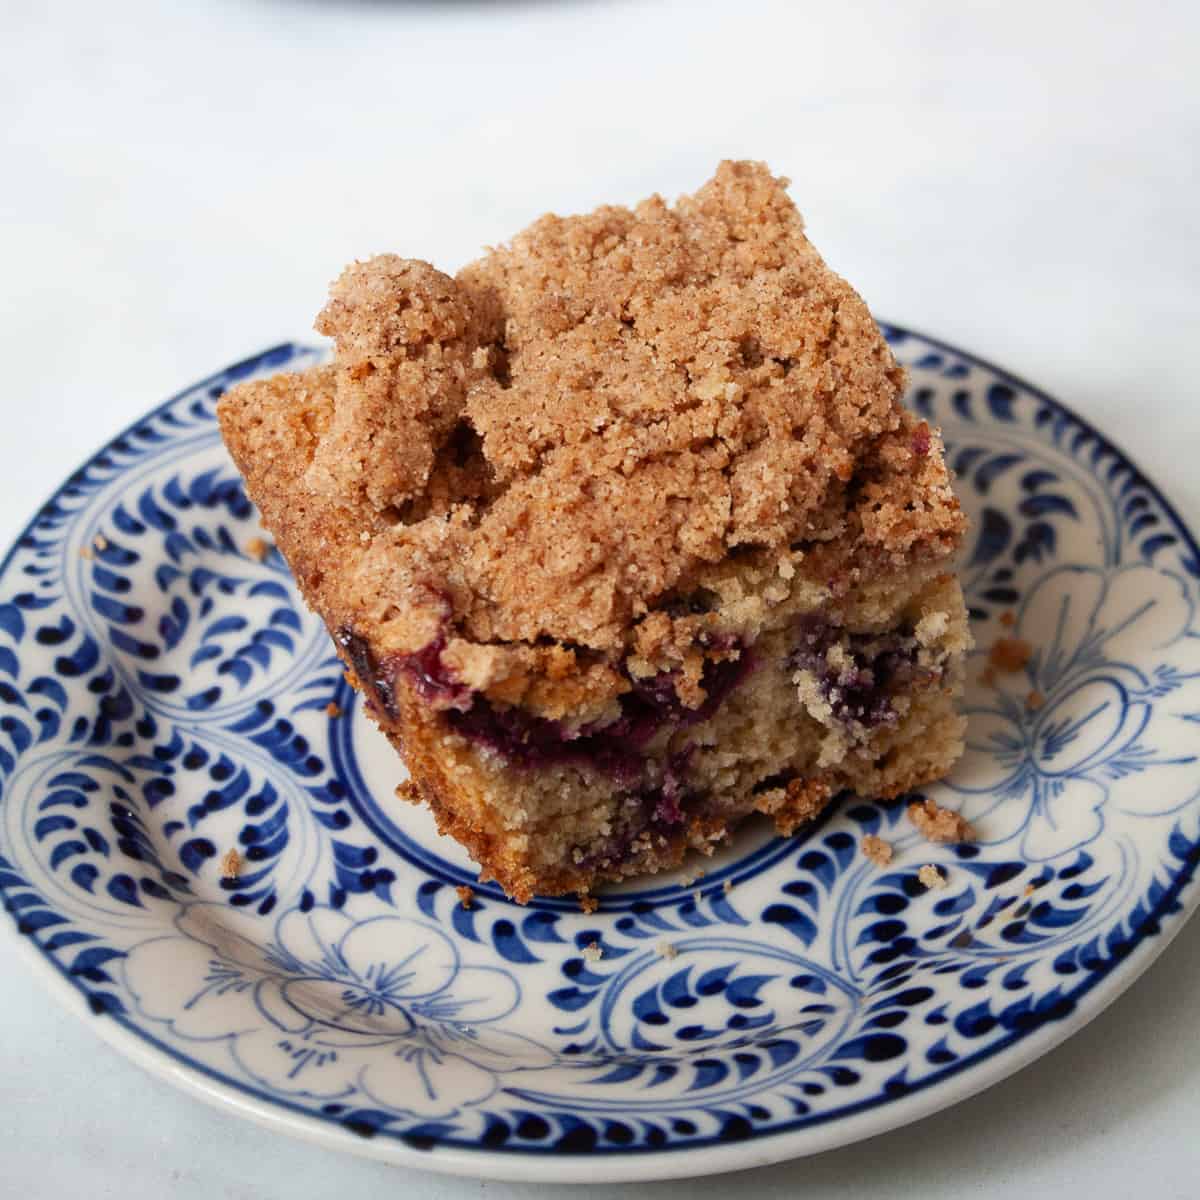 A piece of blueberry coffee cake on a plate.